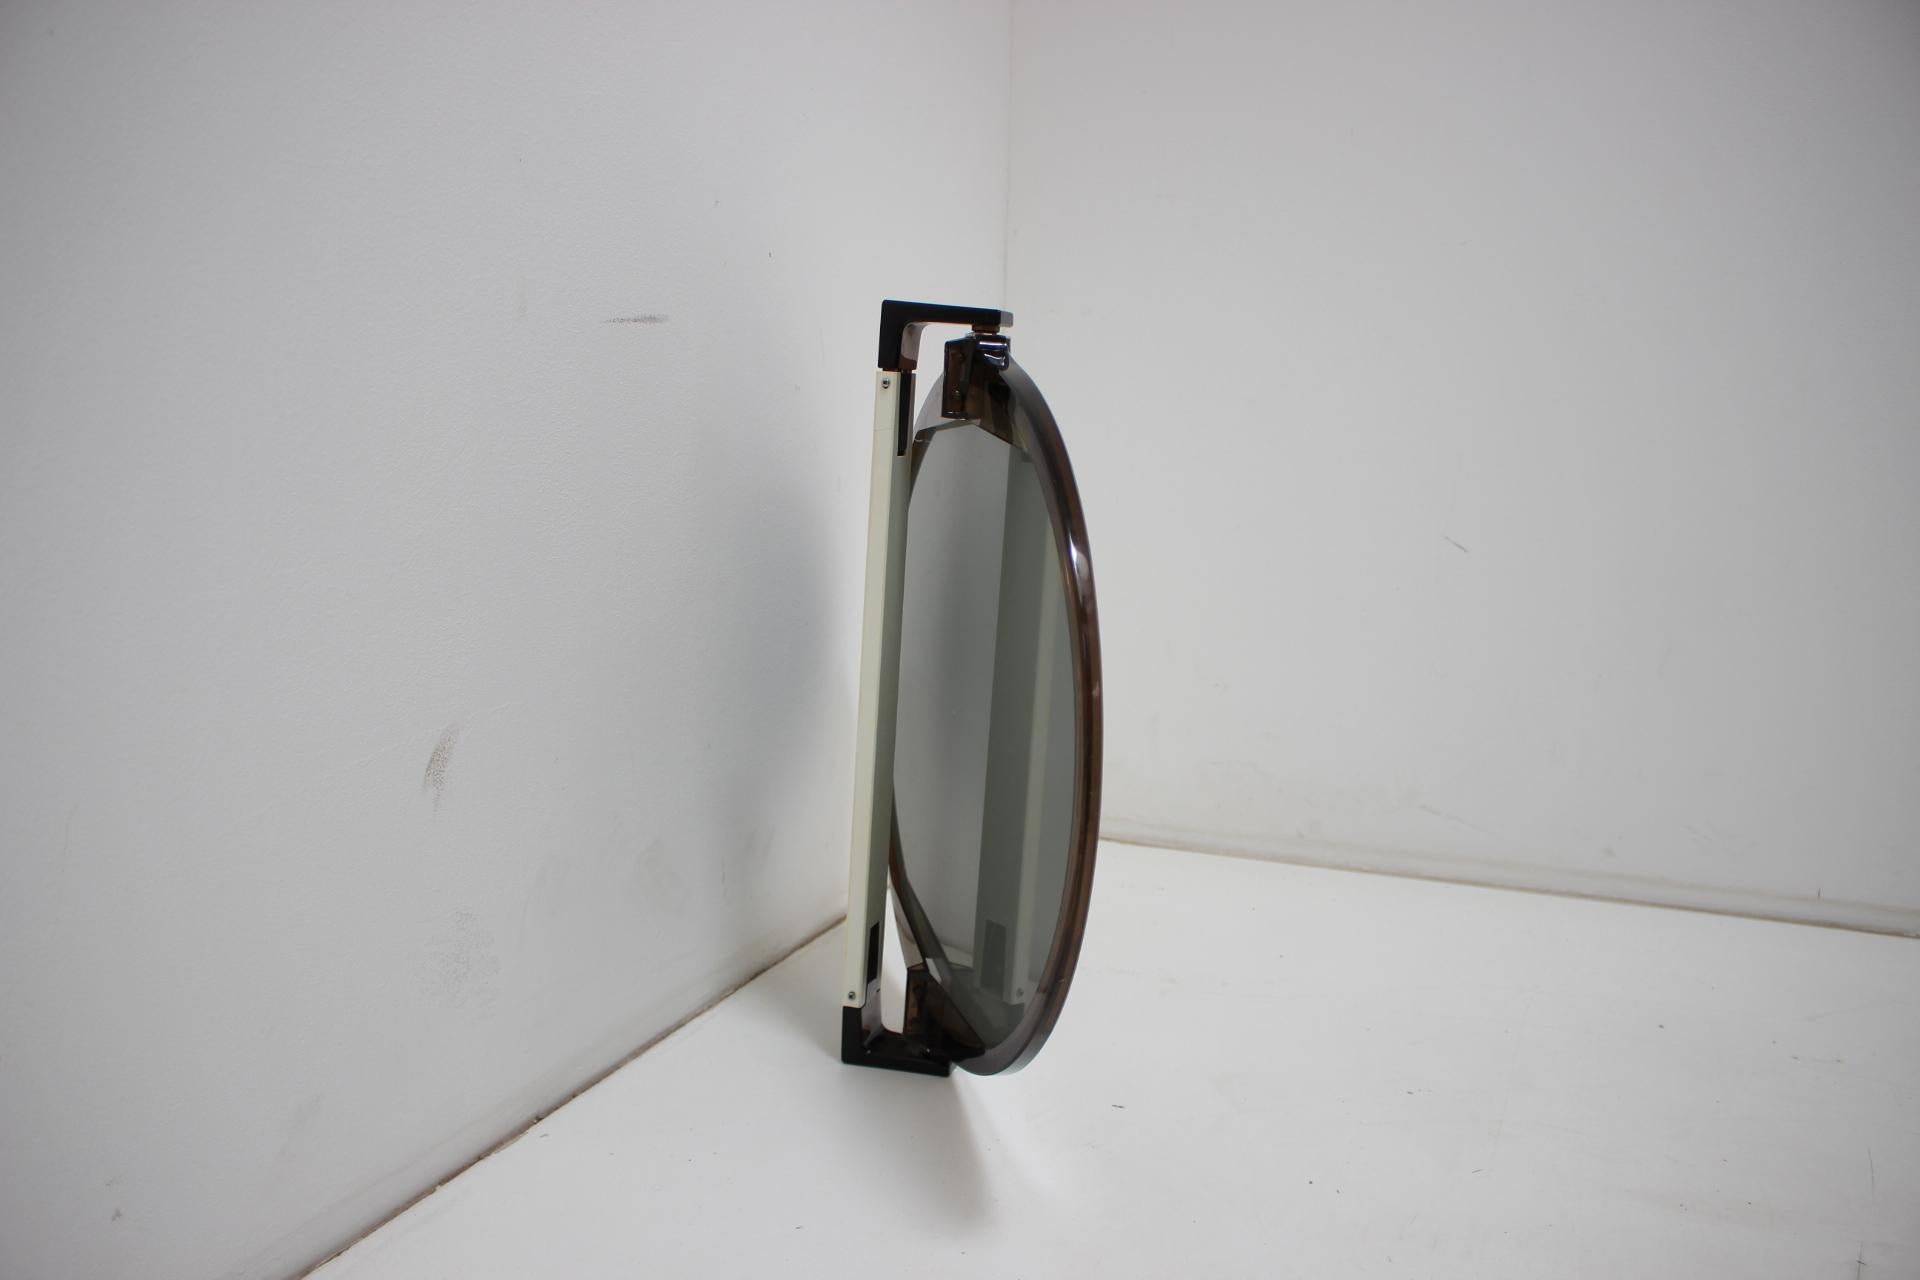 
Made in Czechoslovakia
Made of Mirror,plastic
With Aged Patina
Re-polished
Good Original Condition